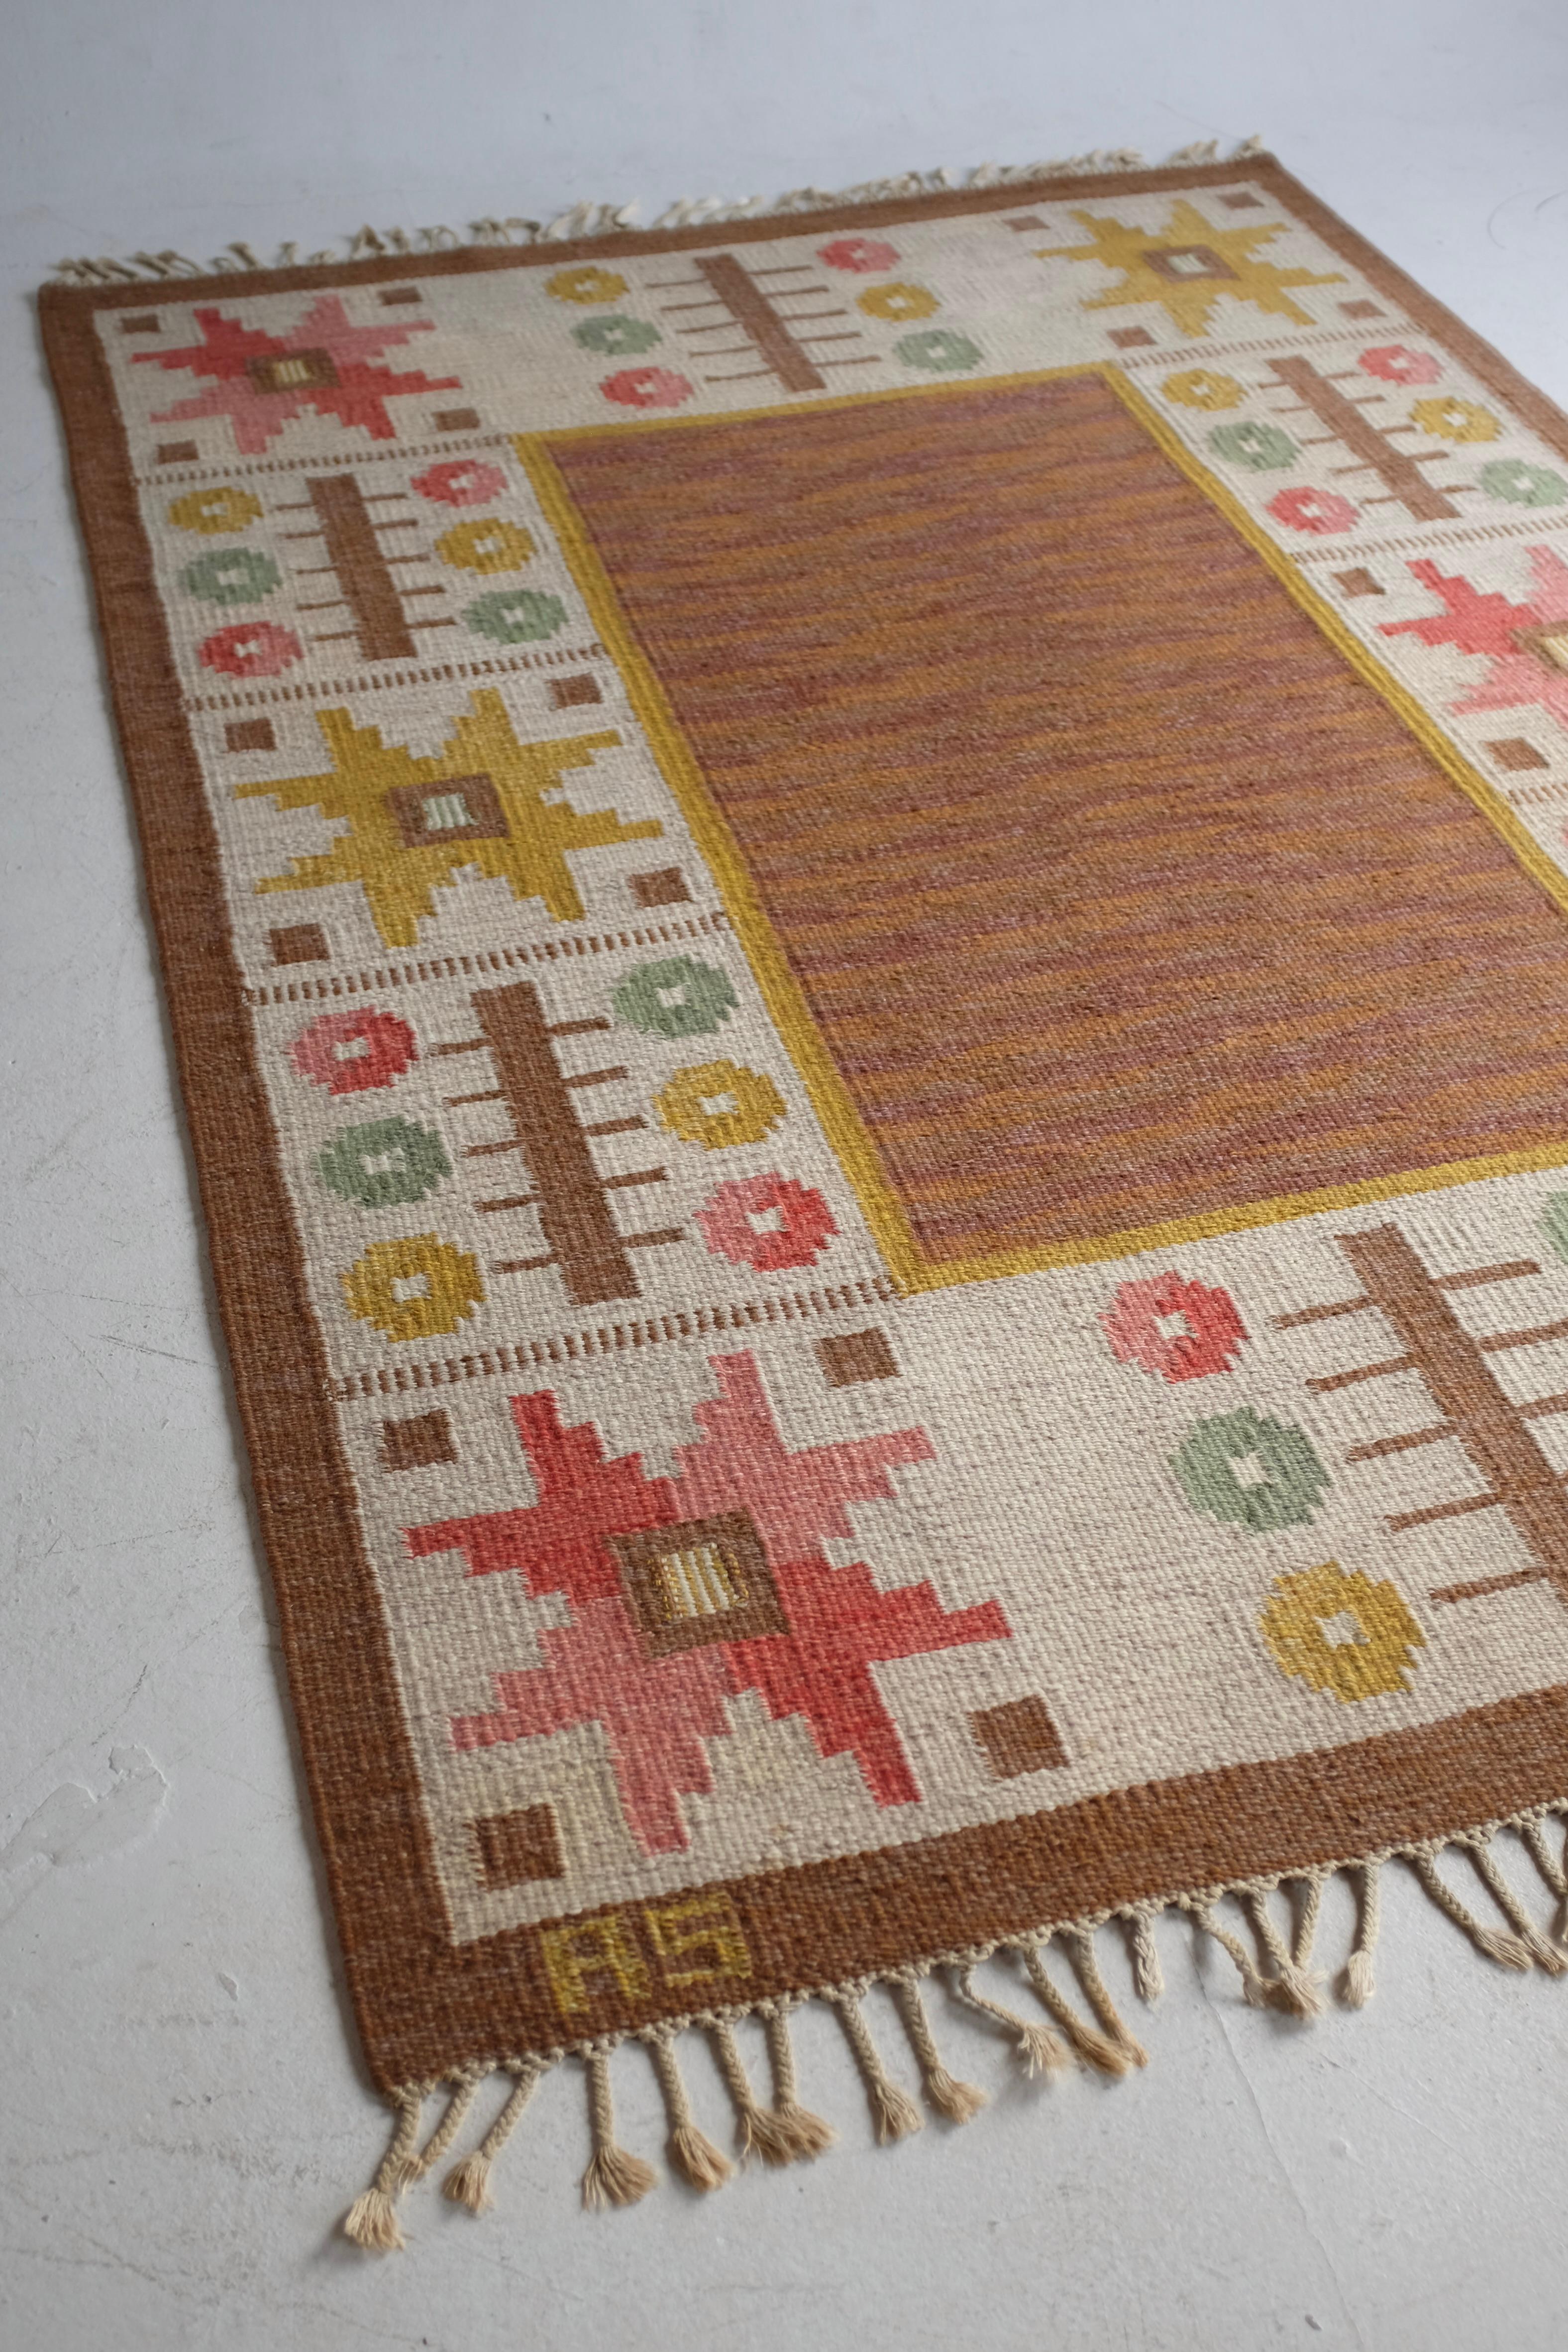 Beautiful Mid-Century rug by Swedish designer Astrid Sampe. A brown and yellow rectangular shape in the middle is surrounded of stars and organic shapes in green, yellow and pink tones. Astrid Sampe was a prolific textile designer not only in Sweden